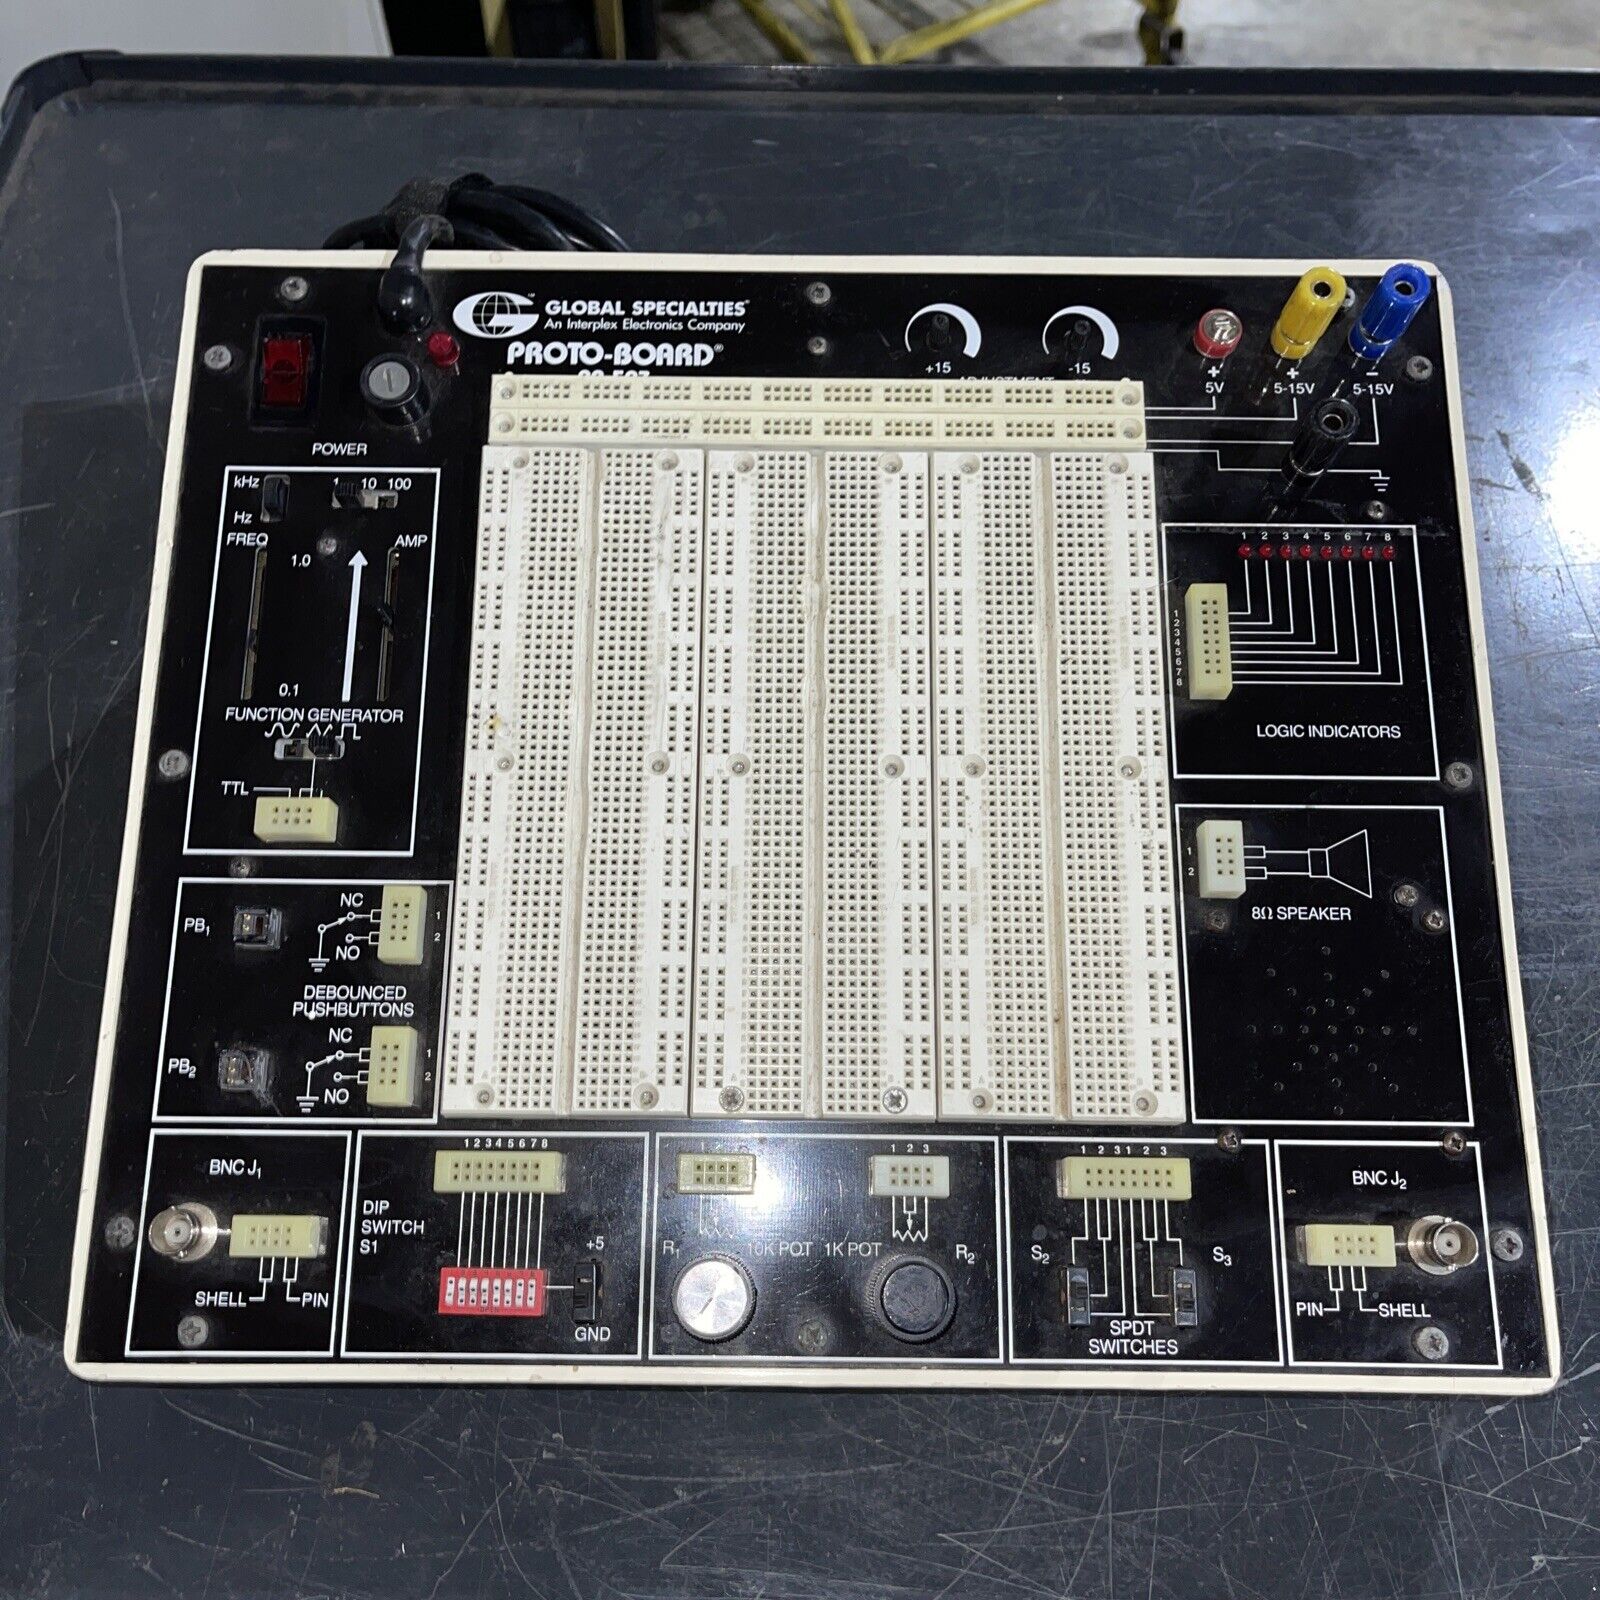 One of our older-model workbenches, with voltage & ground sources at the top right, logic indicators below that, push buttons at the bottom left, logic switches below and slightly right from the push buttons, and a big area of protoboards in the middle. Voltage and ground sources are red and black colored knobs; logic indicators are 8 little LED lights with plastic sockets for connecting to them; push buttons are buttons that pop back out when you release them, along with plastic connector sockets, and logic switches are switches that can be toggles on or off, with plastic connector sockets. The protoboards are pieces of white plastic with lots of sockets in them: two columns of sockets down each side, and many rows of sockets split into two half-rows in the middle. Each socket is just big enough to plug in the tip of one of the wires we’re using. There are 6 protoboards packed edge-to-edge in a 3-wide-by-2-high setup; each is taller than it is wide so the whole setup is squarish (but slightly taller than it is wide).